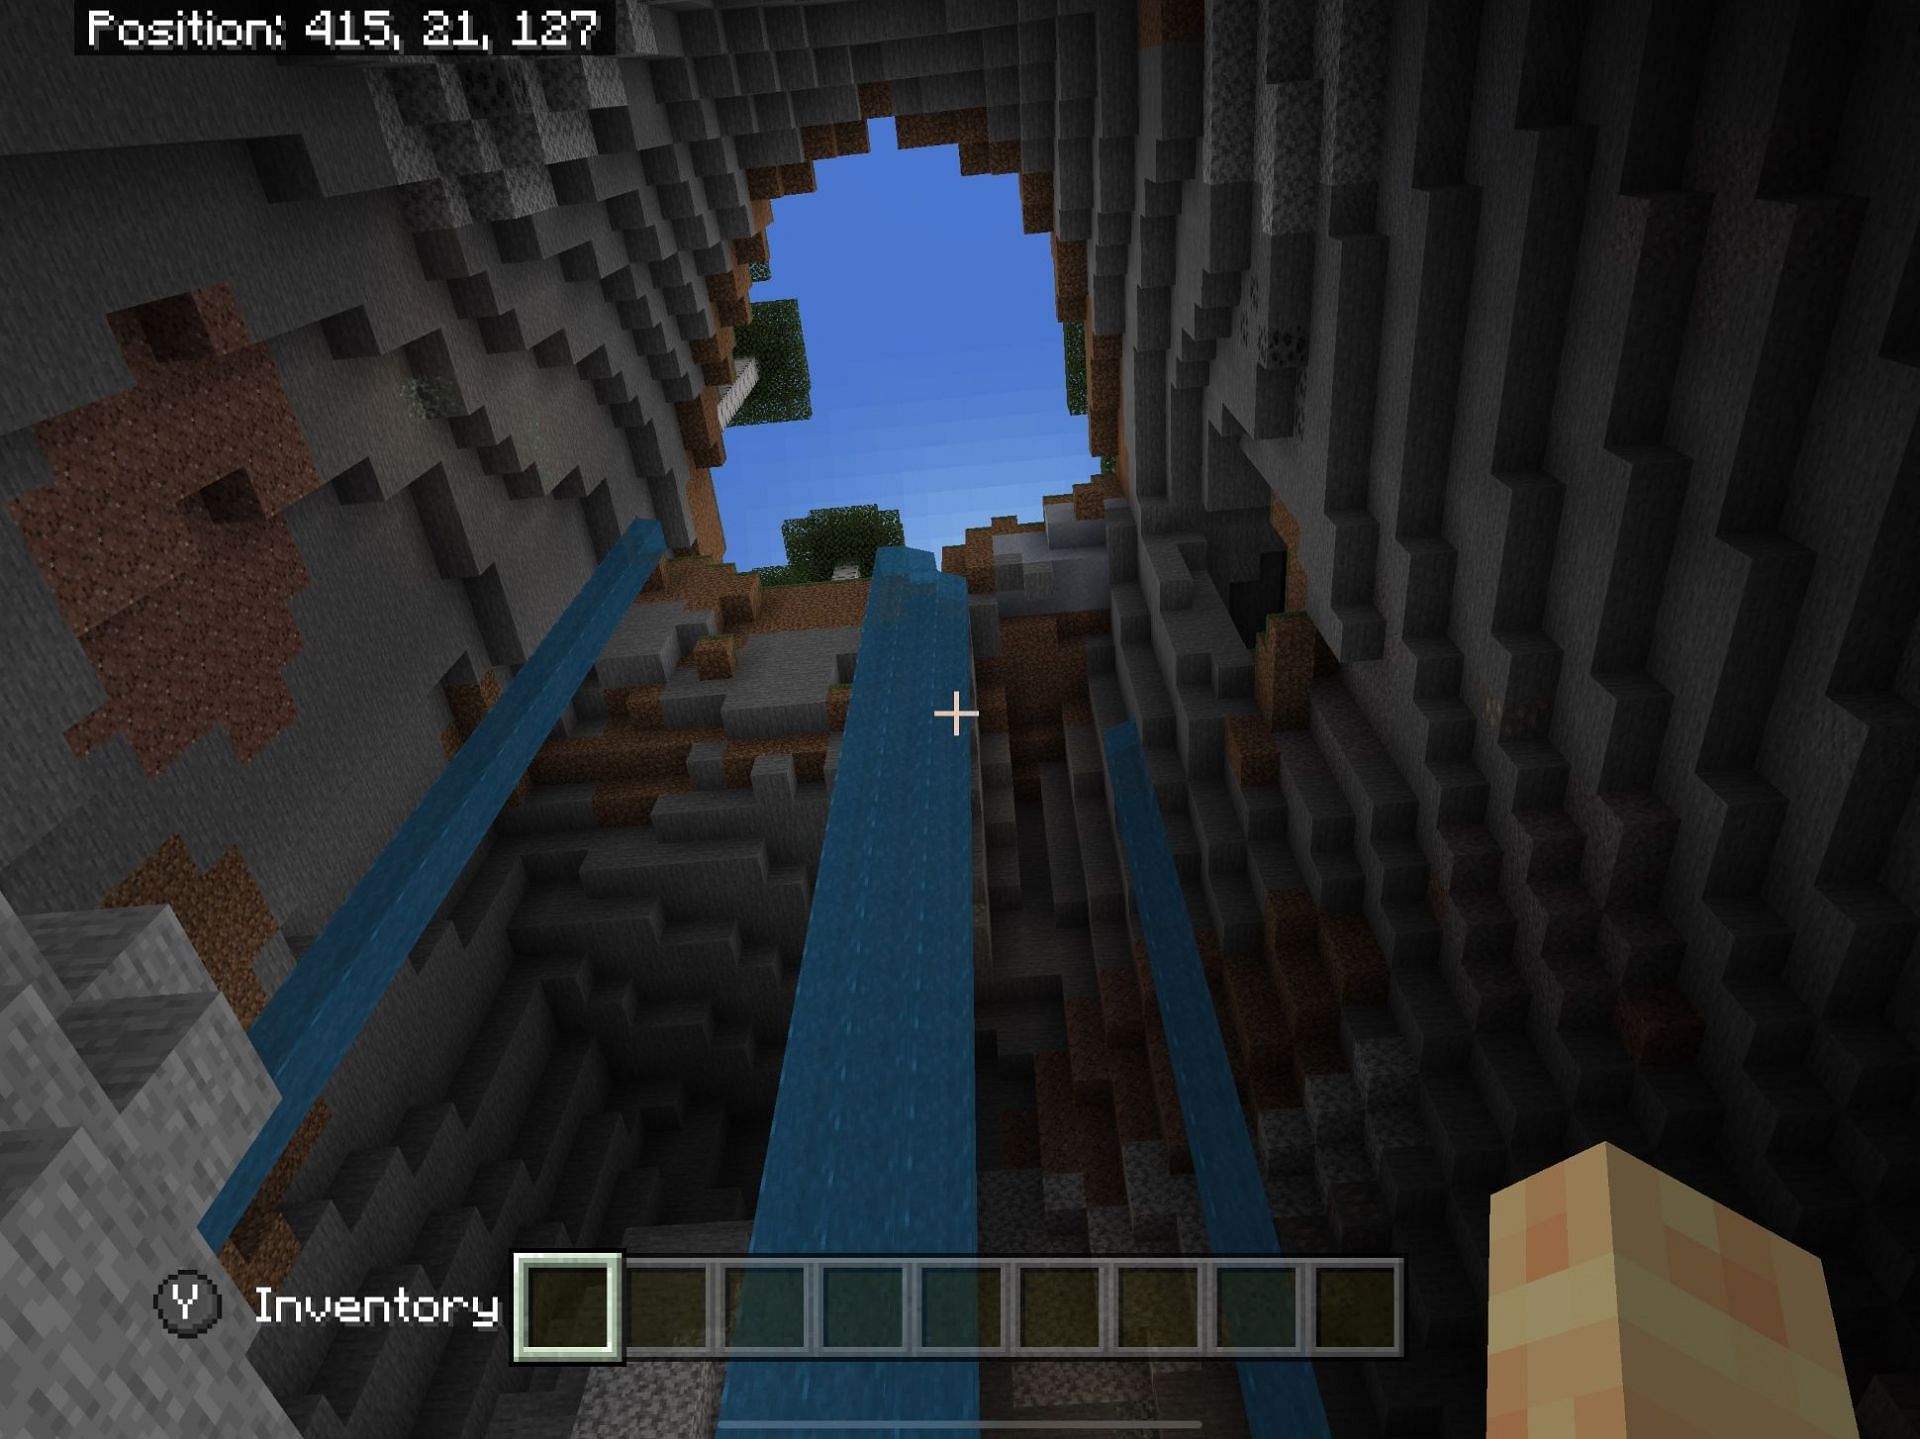 Minecraft players can enter seeds to explore predetermined worlds that can also be shared with others (Image via Minecraft)